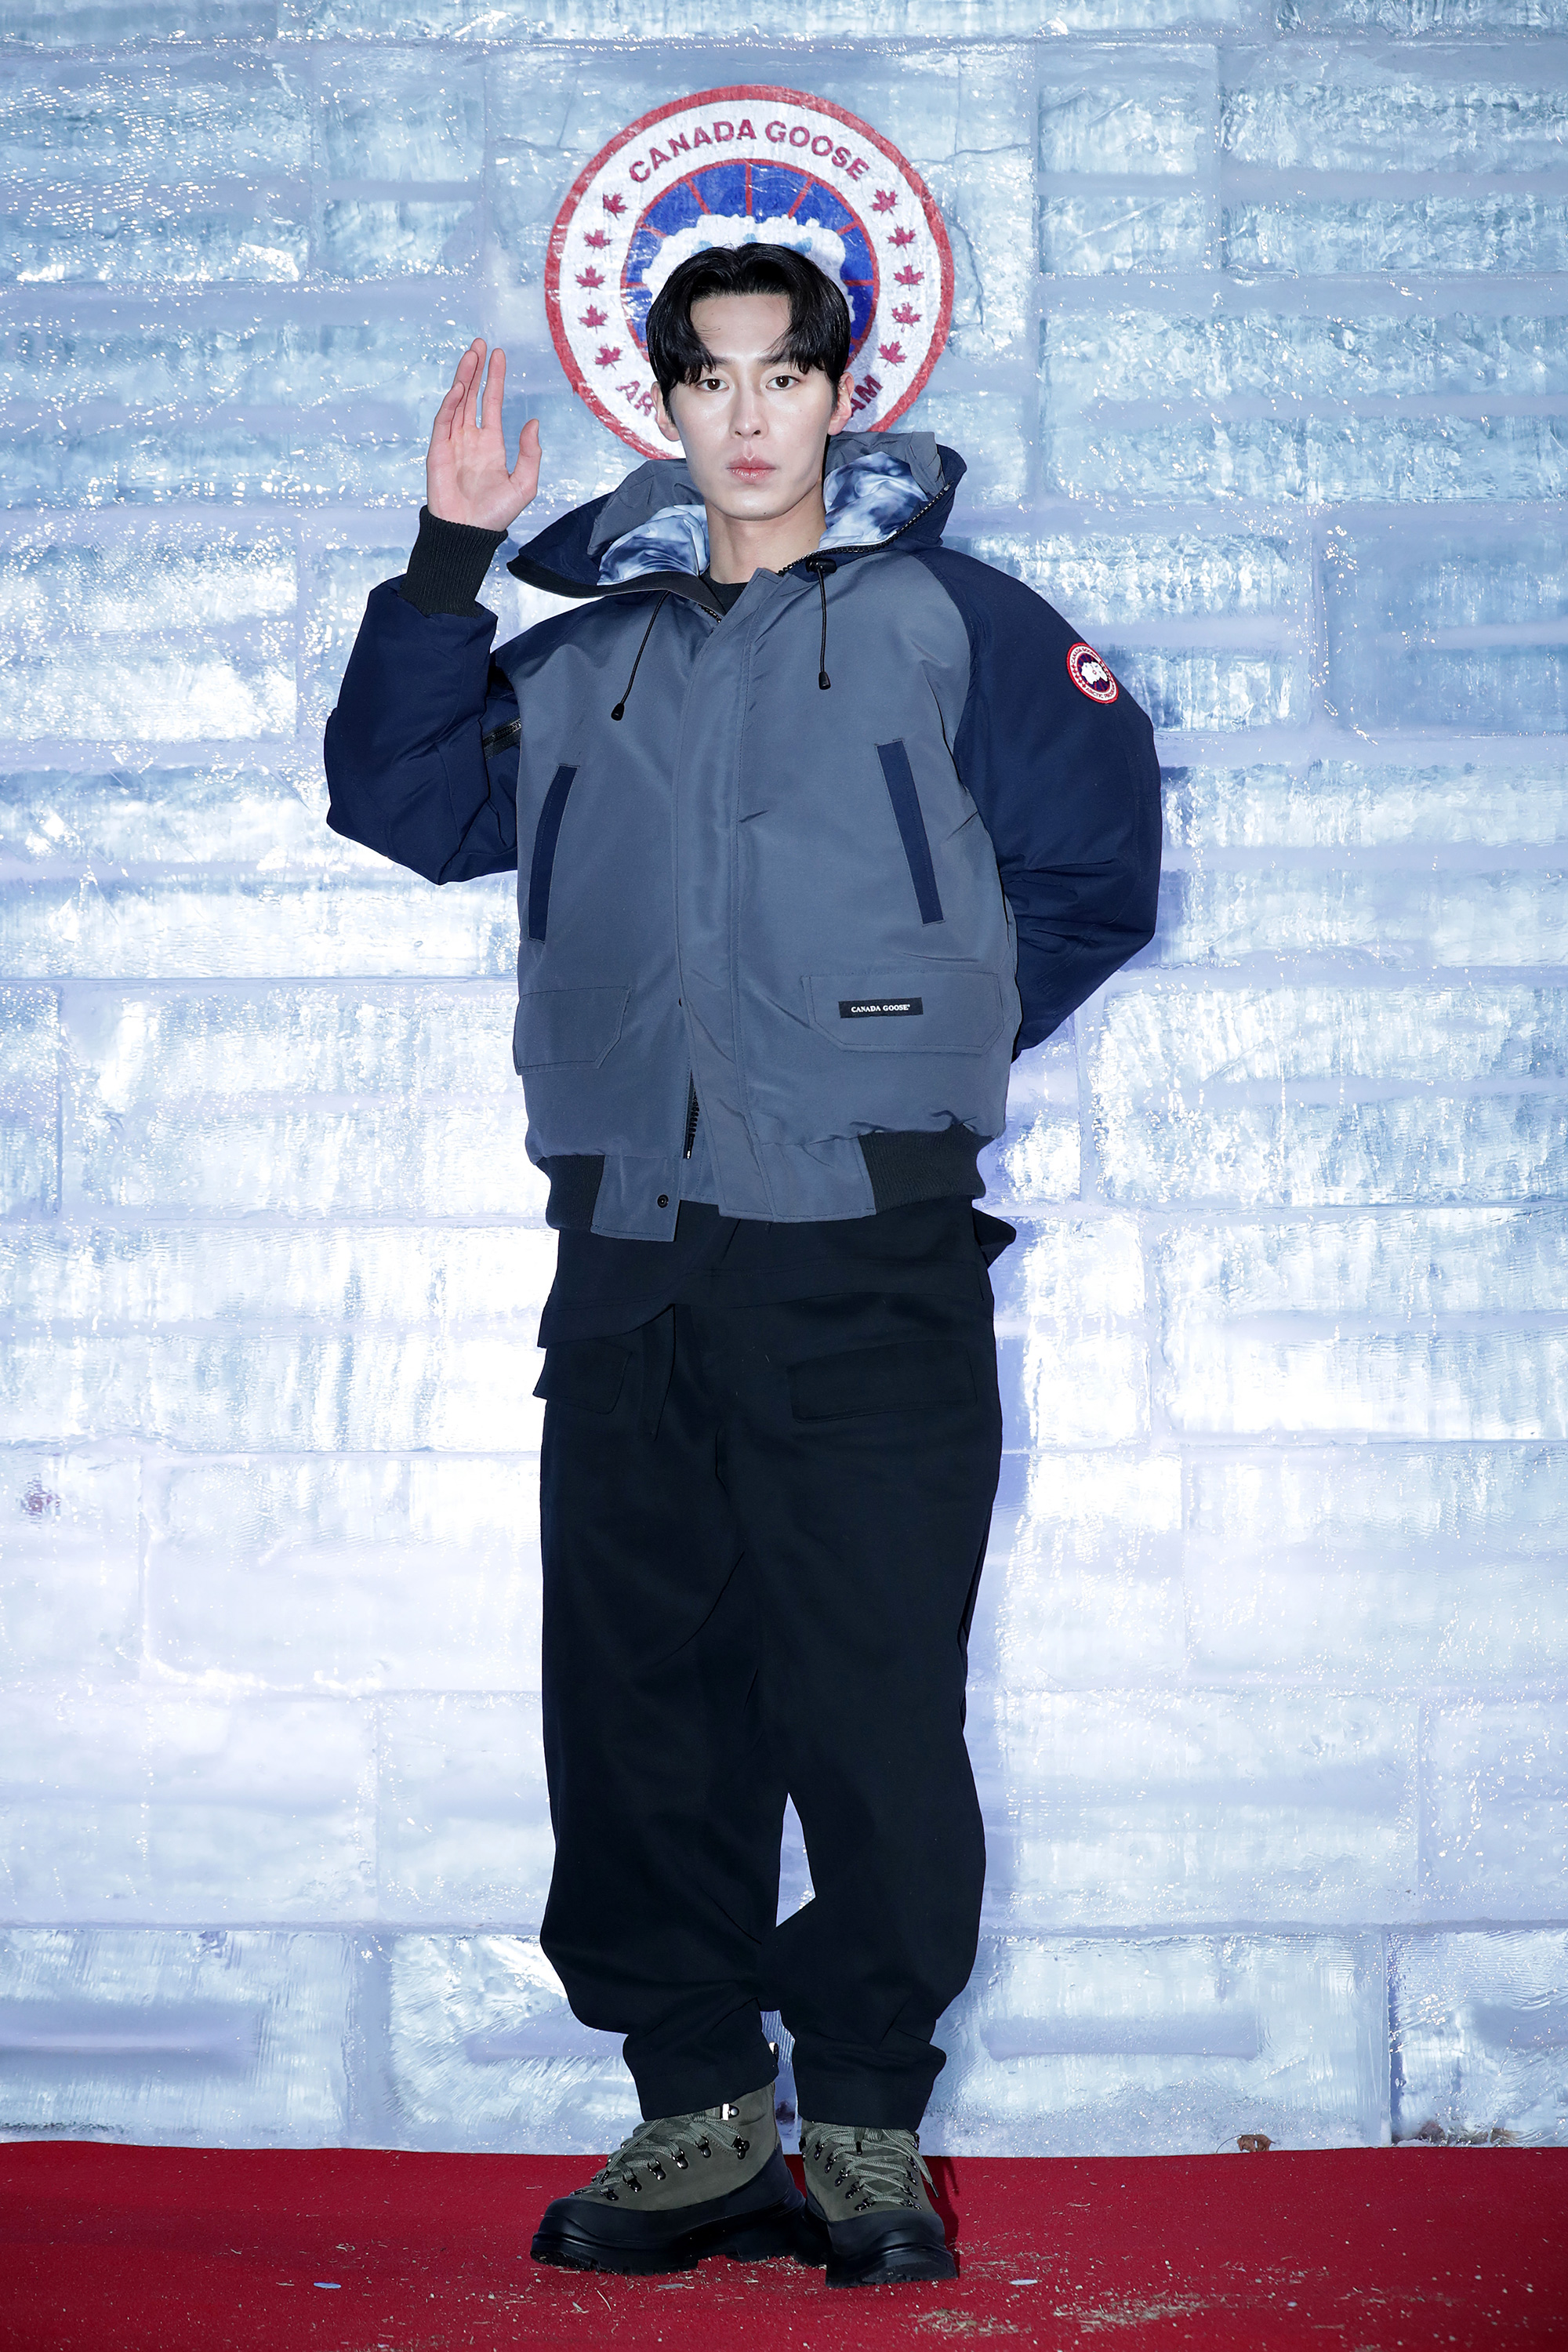 South Korean actor Lee Jae-Wook poses for a photo during the relaunching of the 'Canada Goose' on January 18, 2023 in Seoul, South Korea.